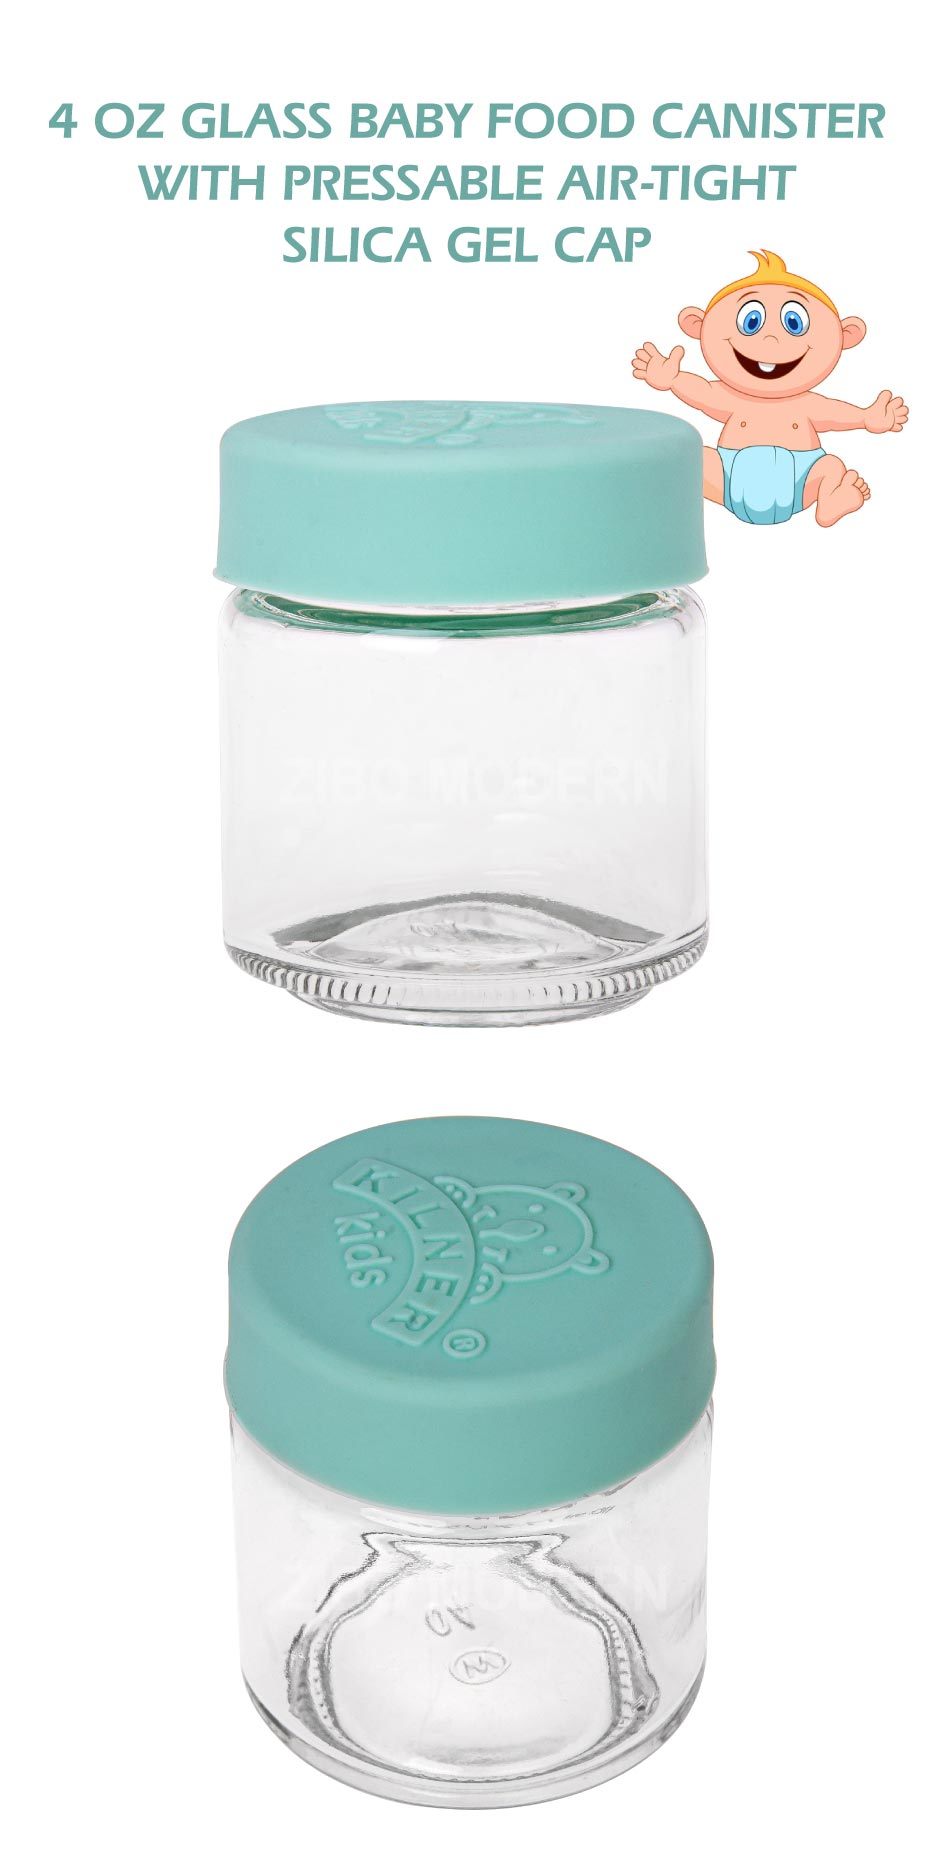 4 Oz Glass Baby Food Canister with Press-Able Air-Tight Silica Gel Cap